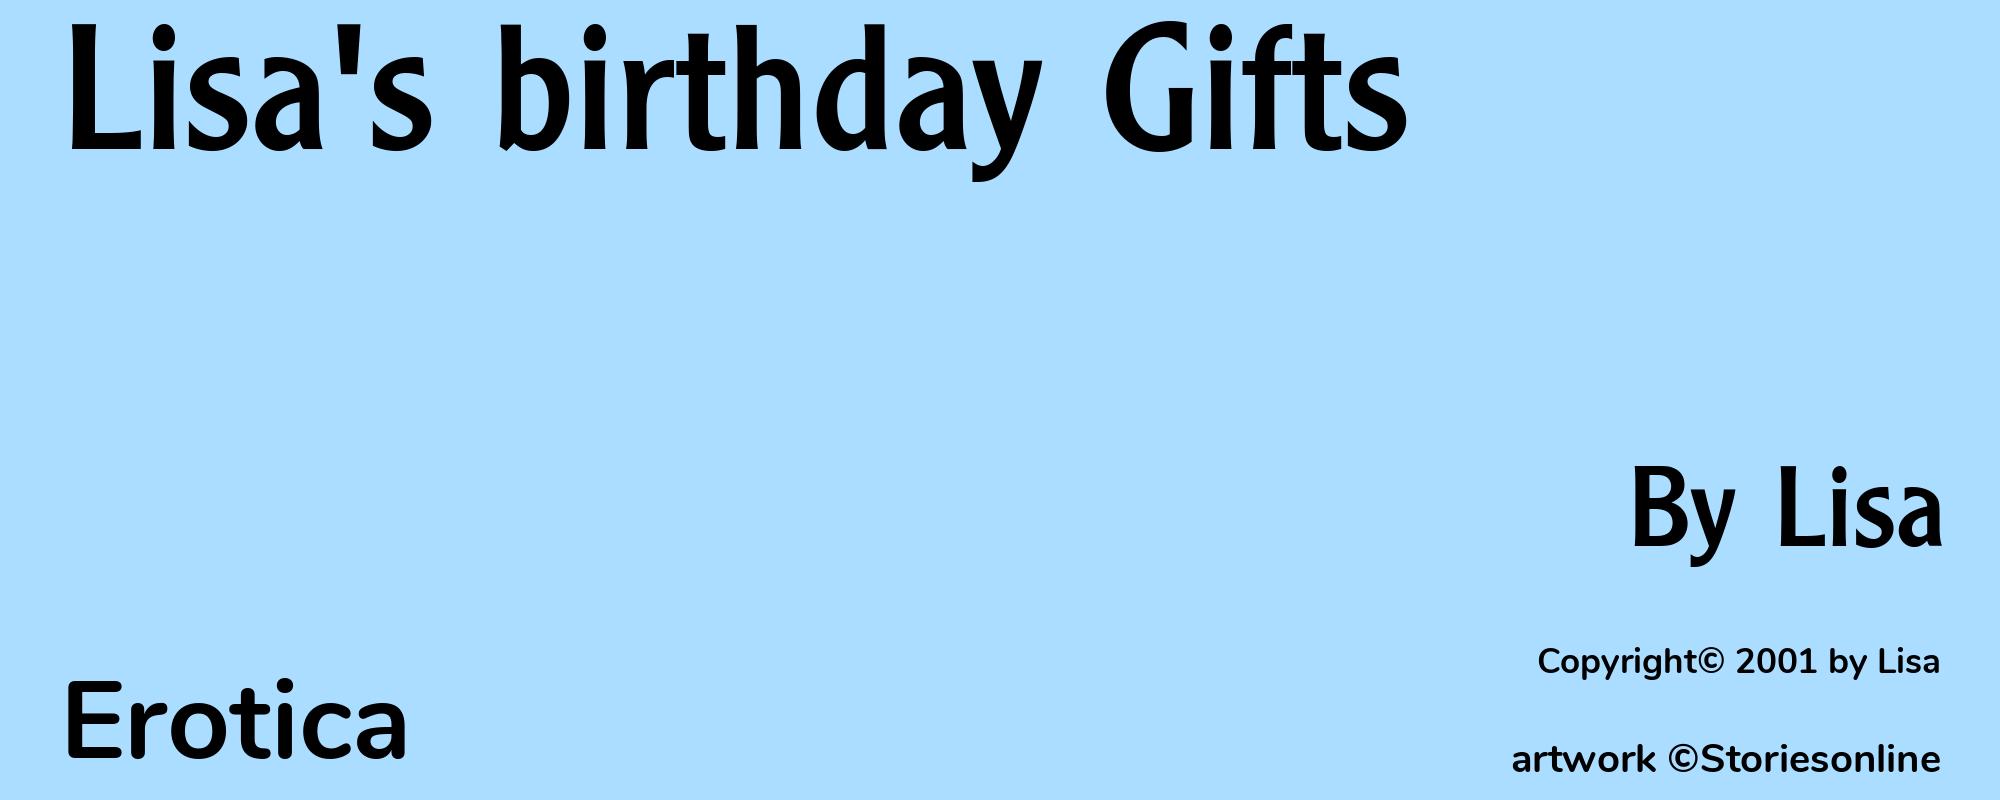 Lisa's birthday Gifts - Cover